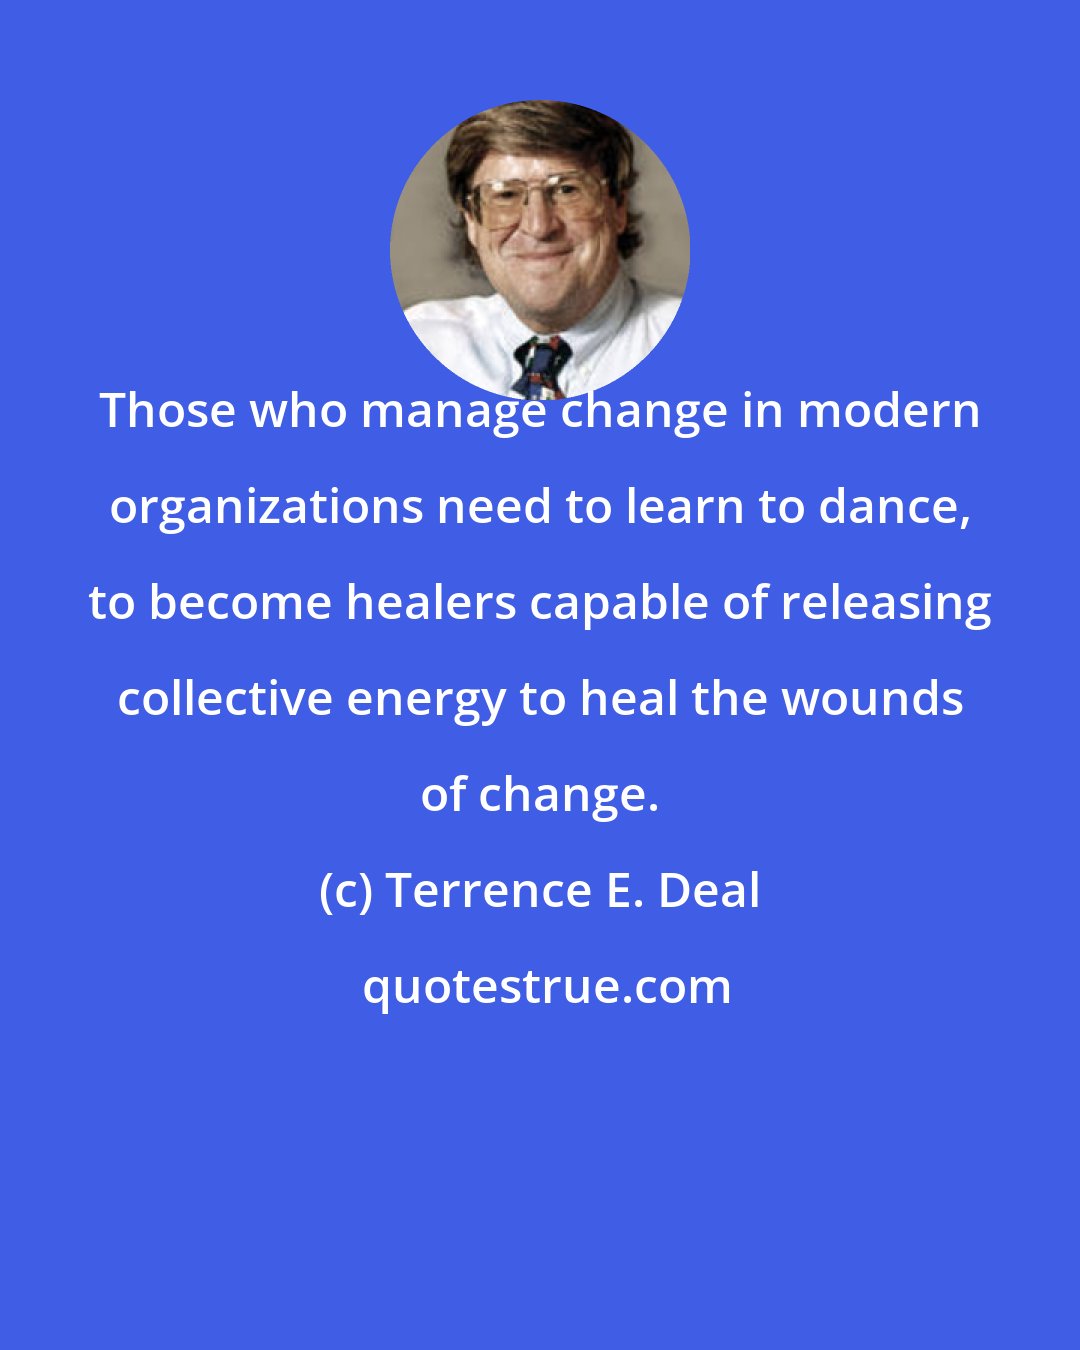 Terrence E. Deal: Those who manage change in modern organizations need to learn to dance, to become healers capable of releasing collective energy to heal the wounds of change.